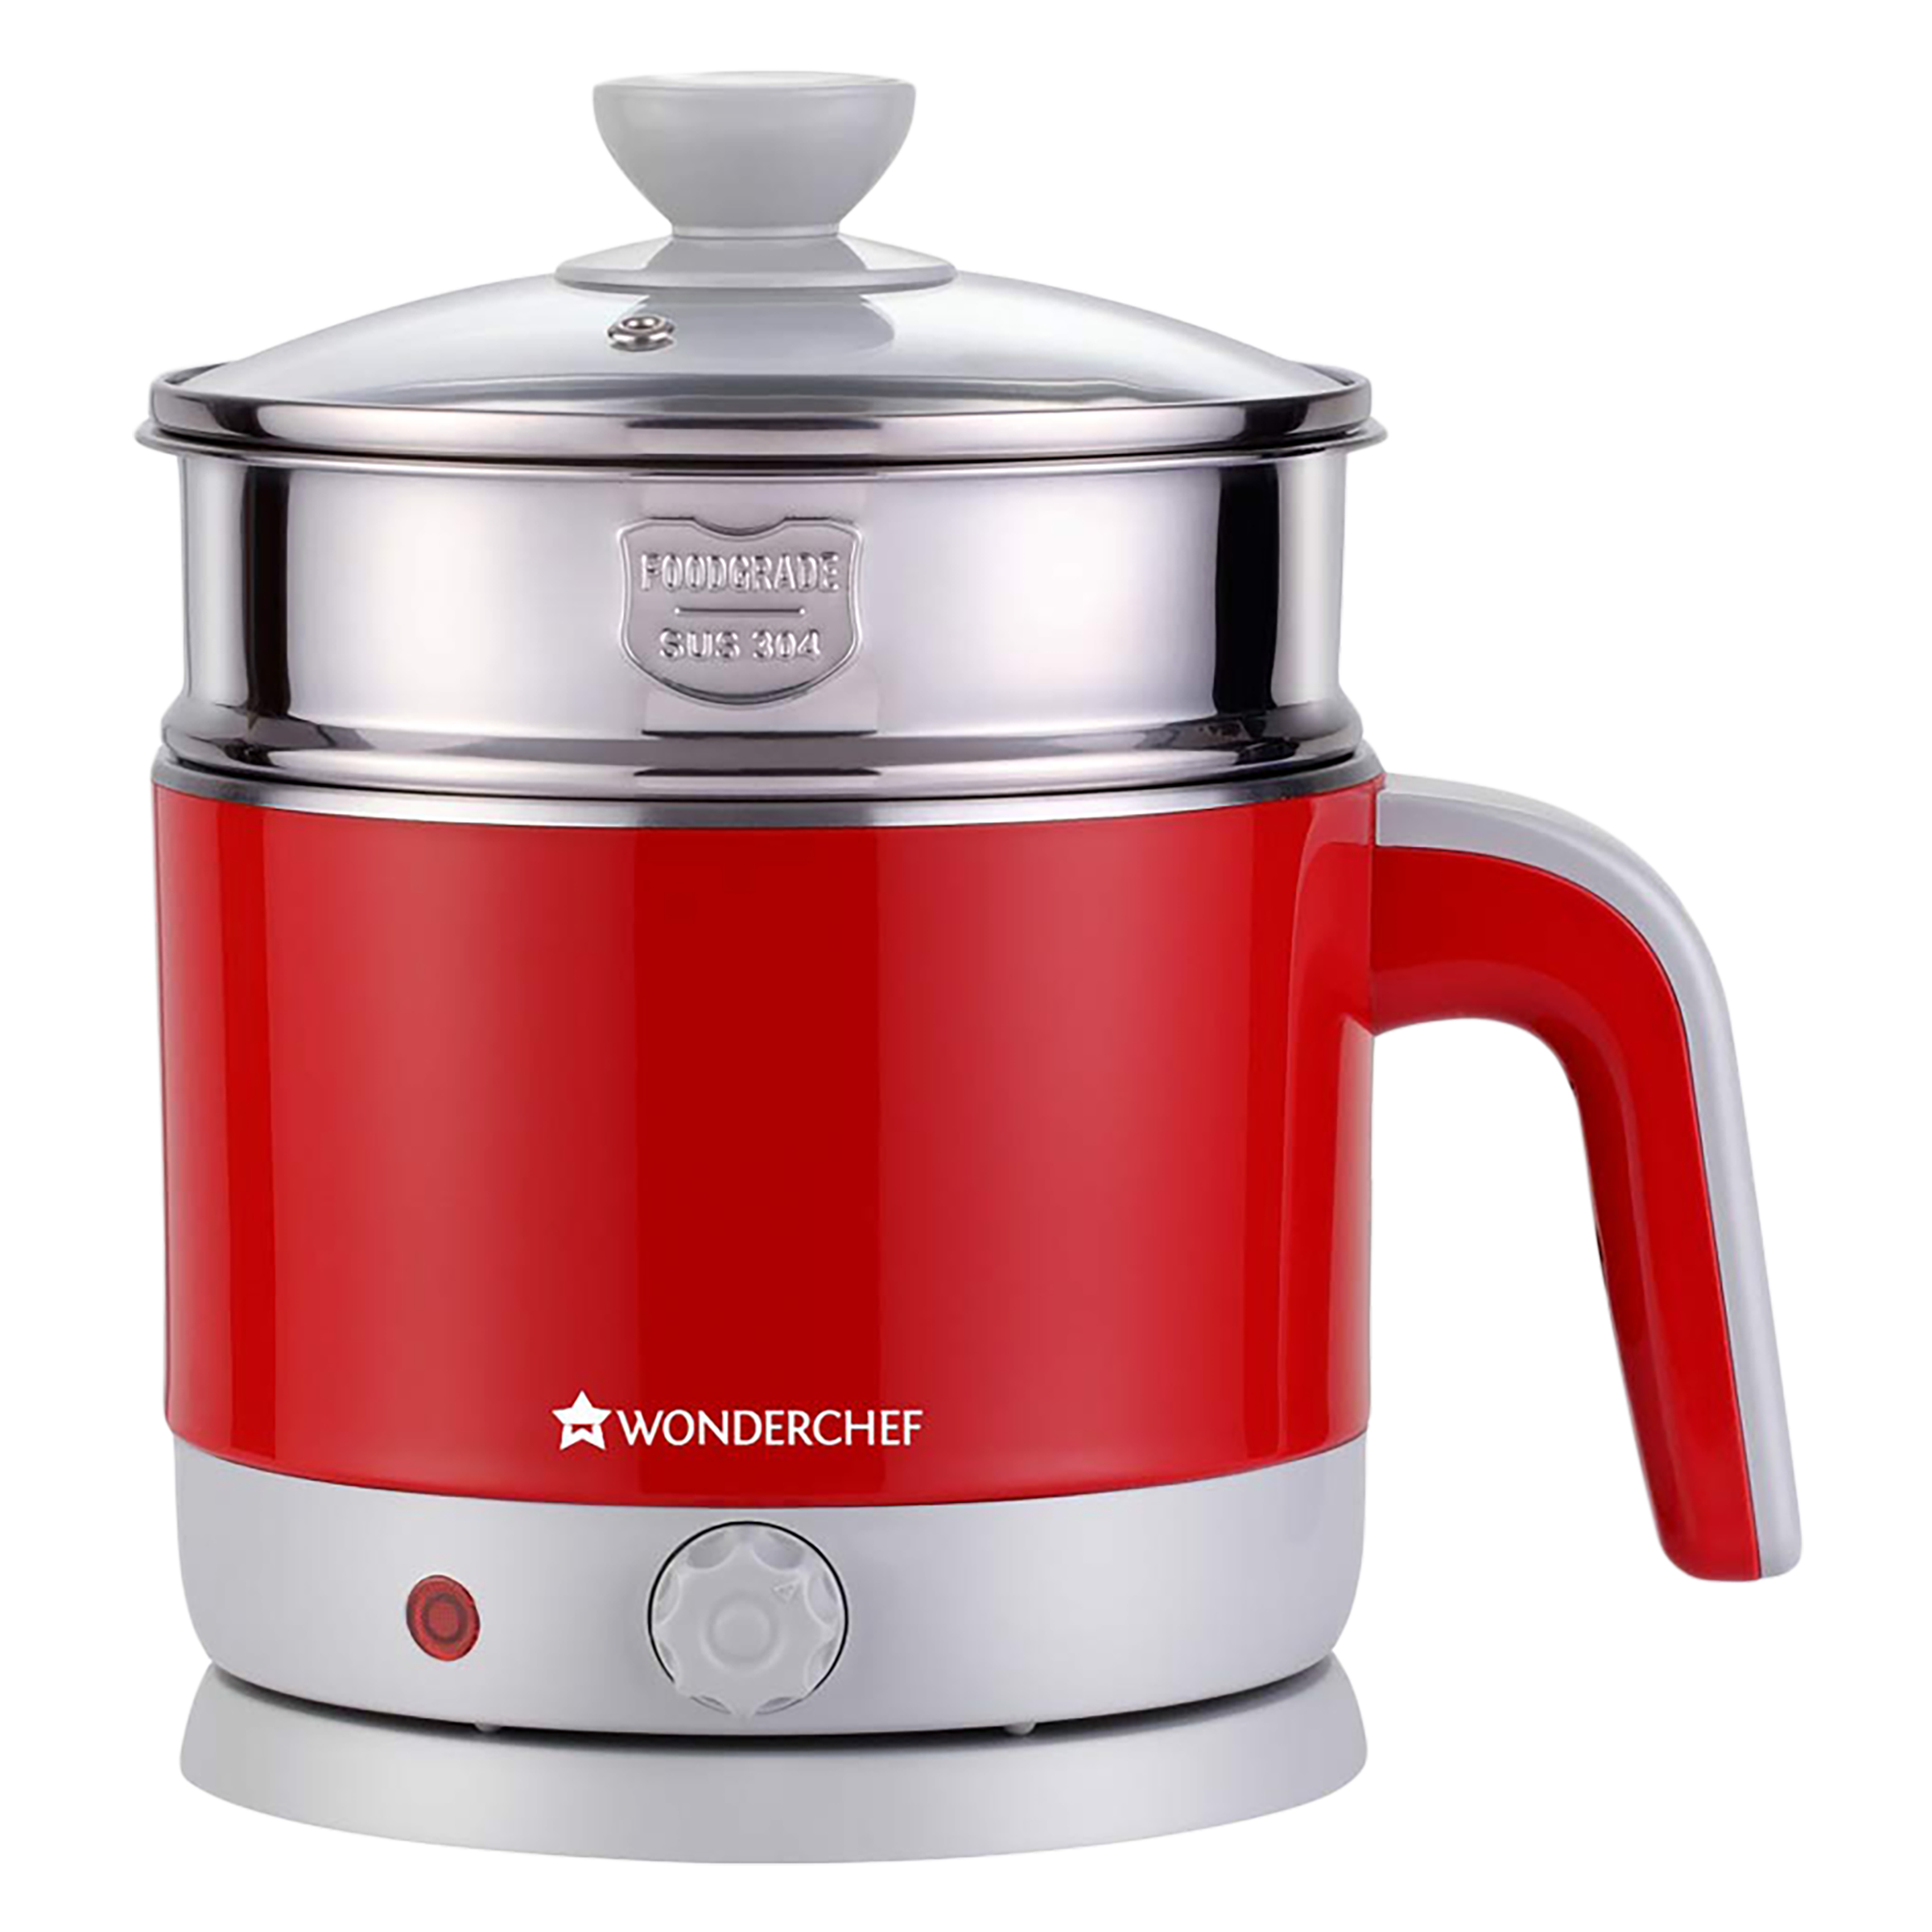 Wonderchef Luxe Multicook 1.2 Litres 1000 Watts Electric Kettle (Detachable Base, Power On and Ready Indicator, 63152931, Red)_1